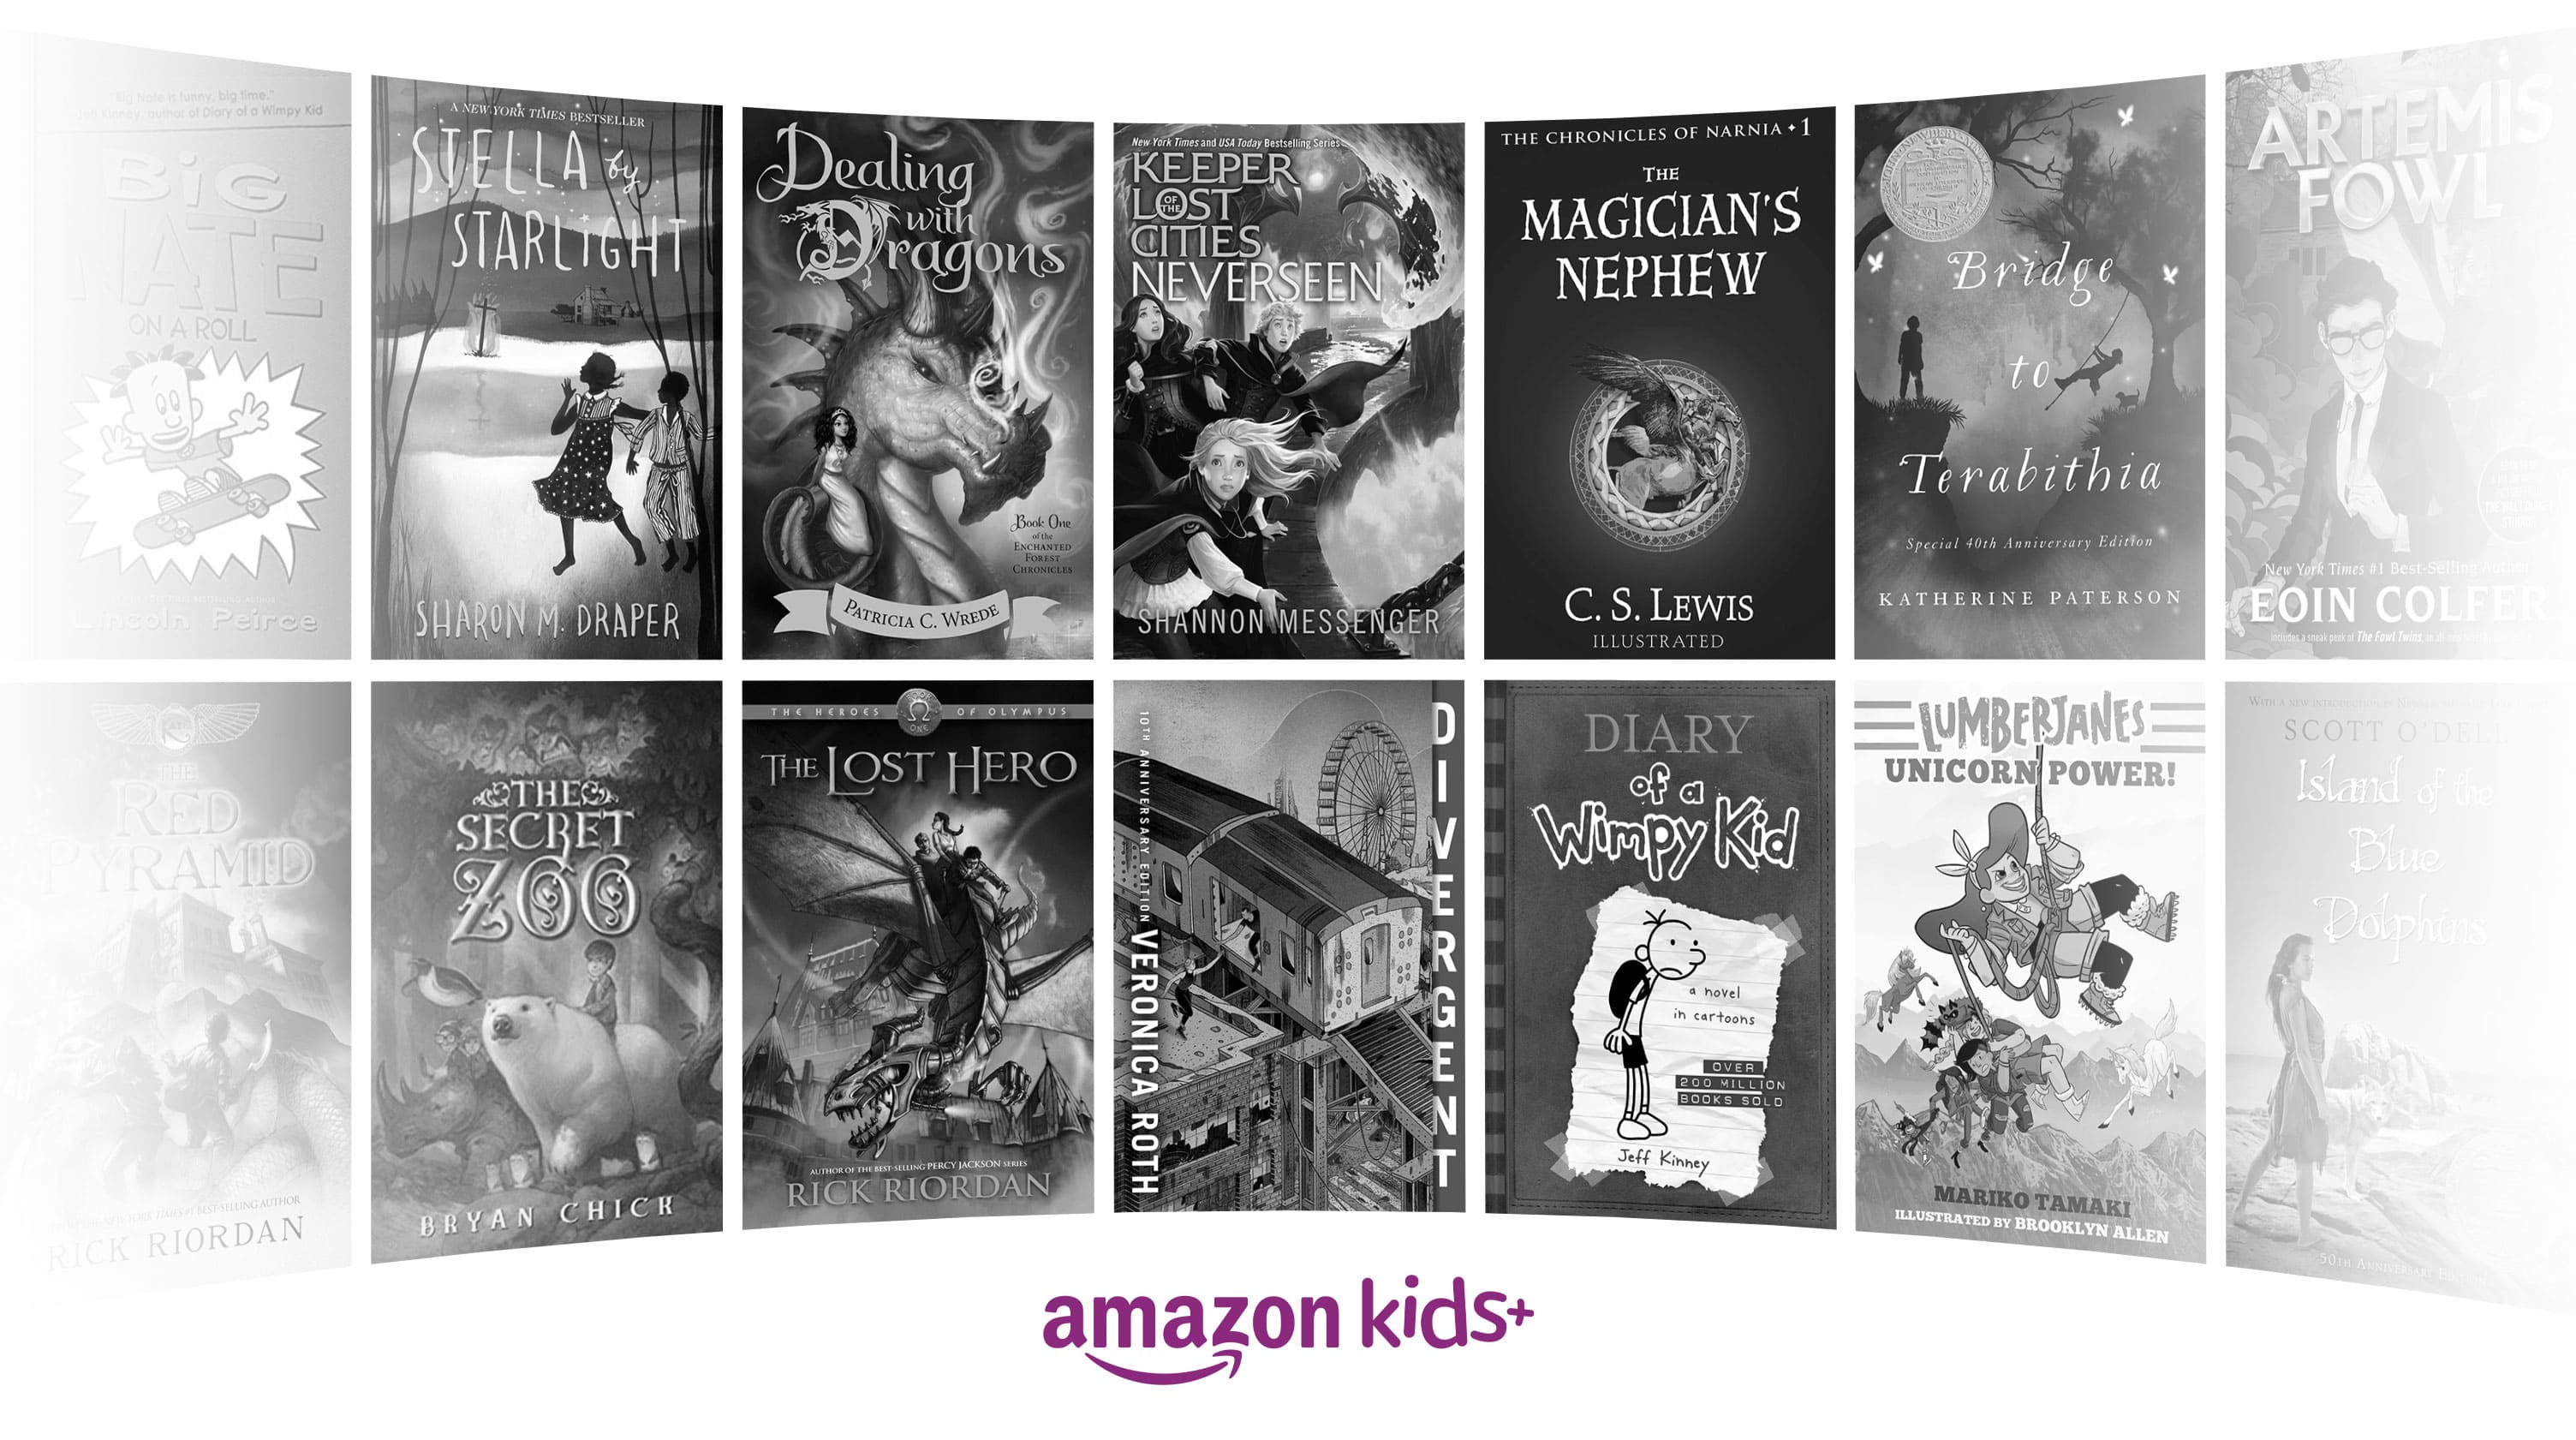 Amazon Kids+ content titles in black and white.